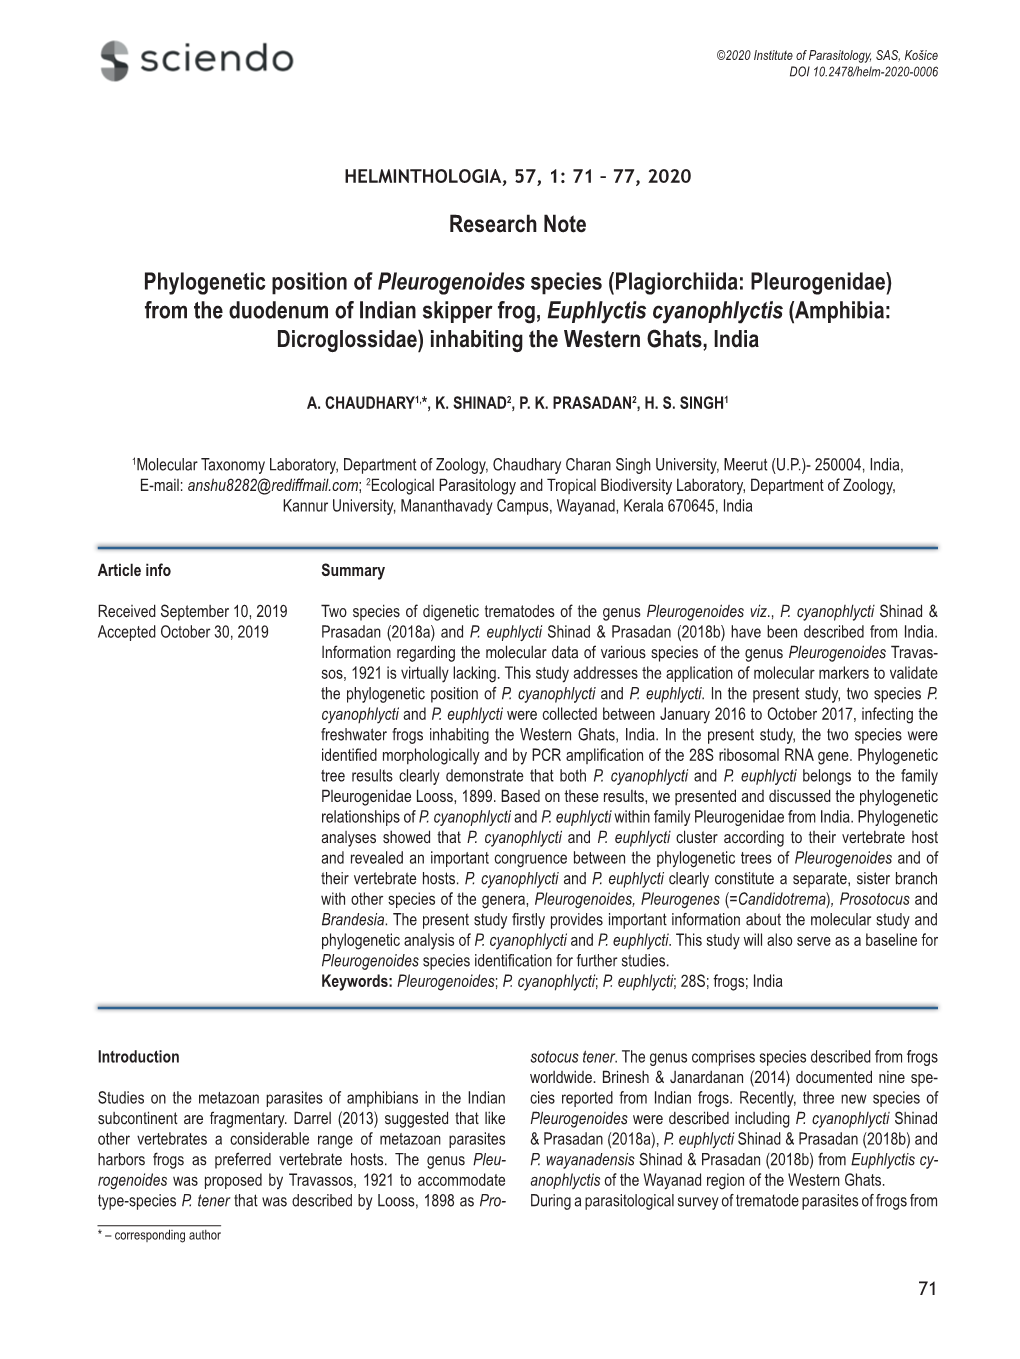 Research Note Phylogenetic Position of Pleurogenoides Species